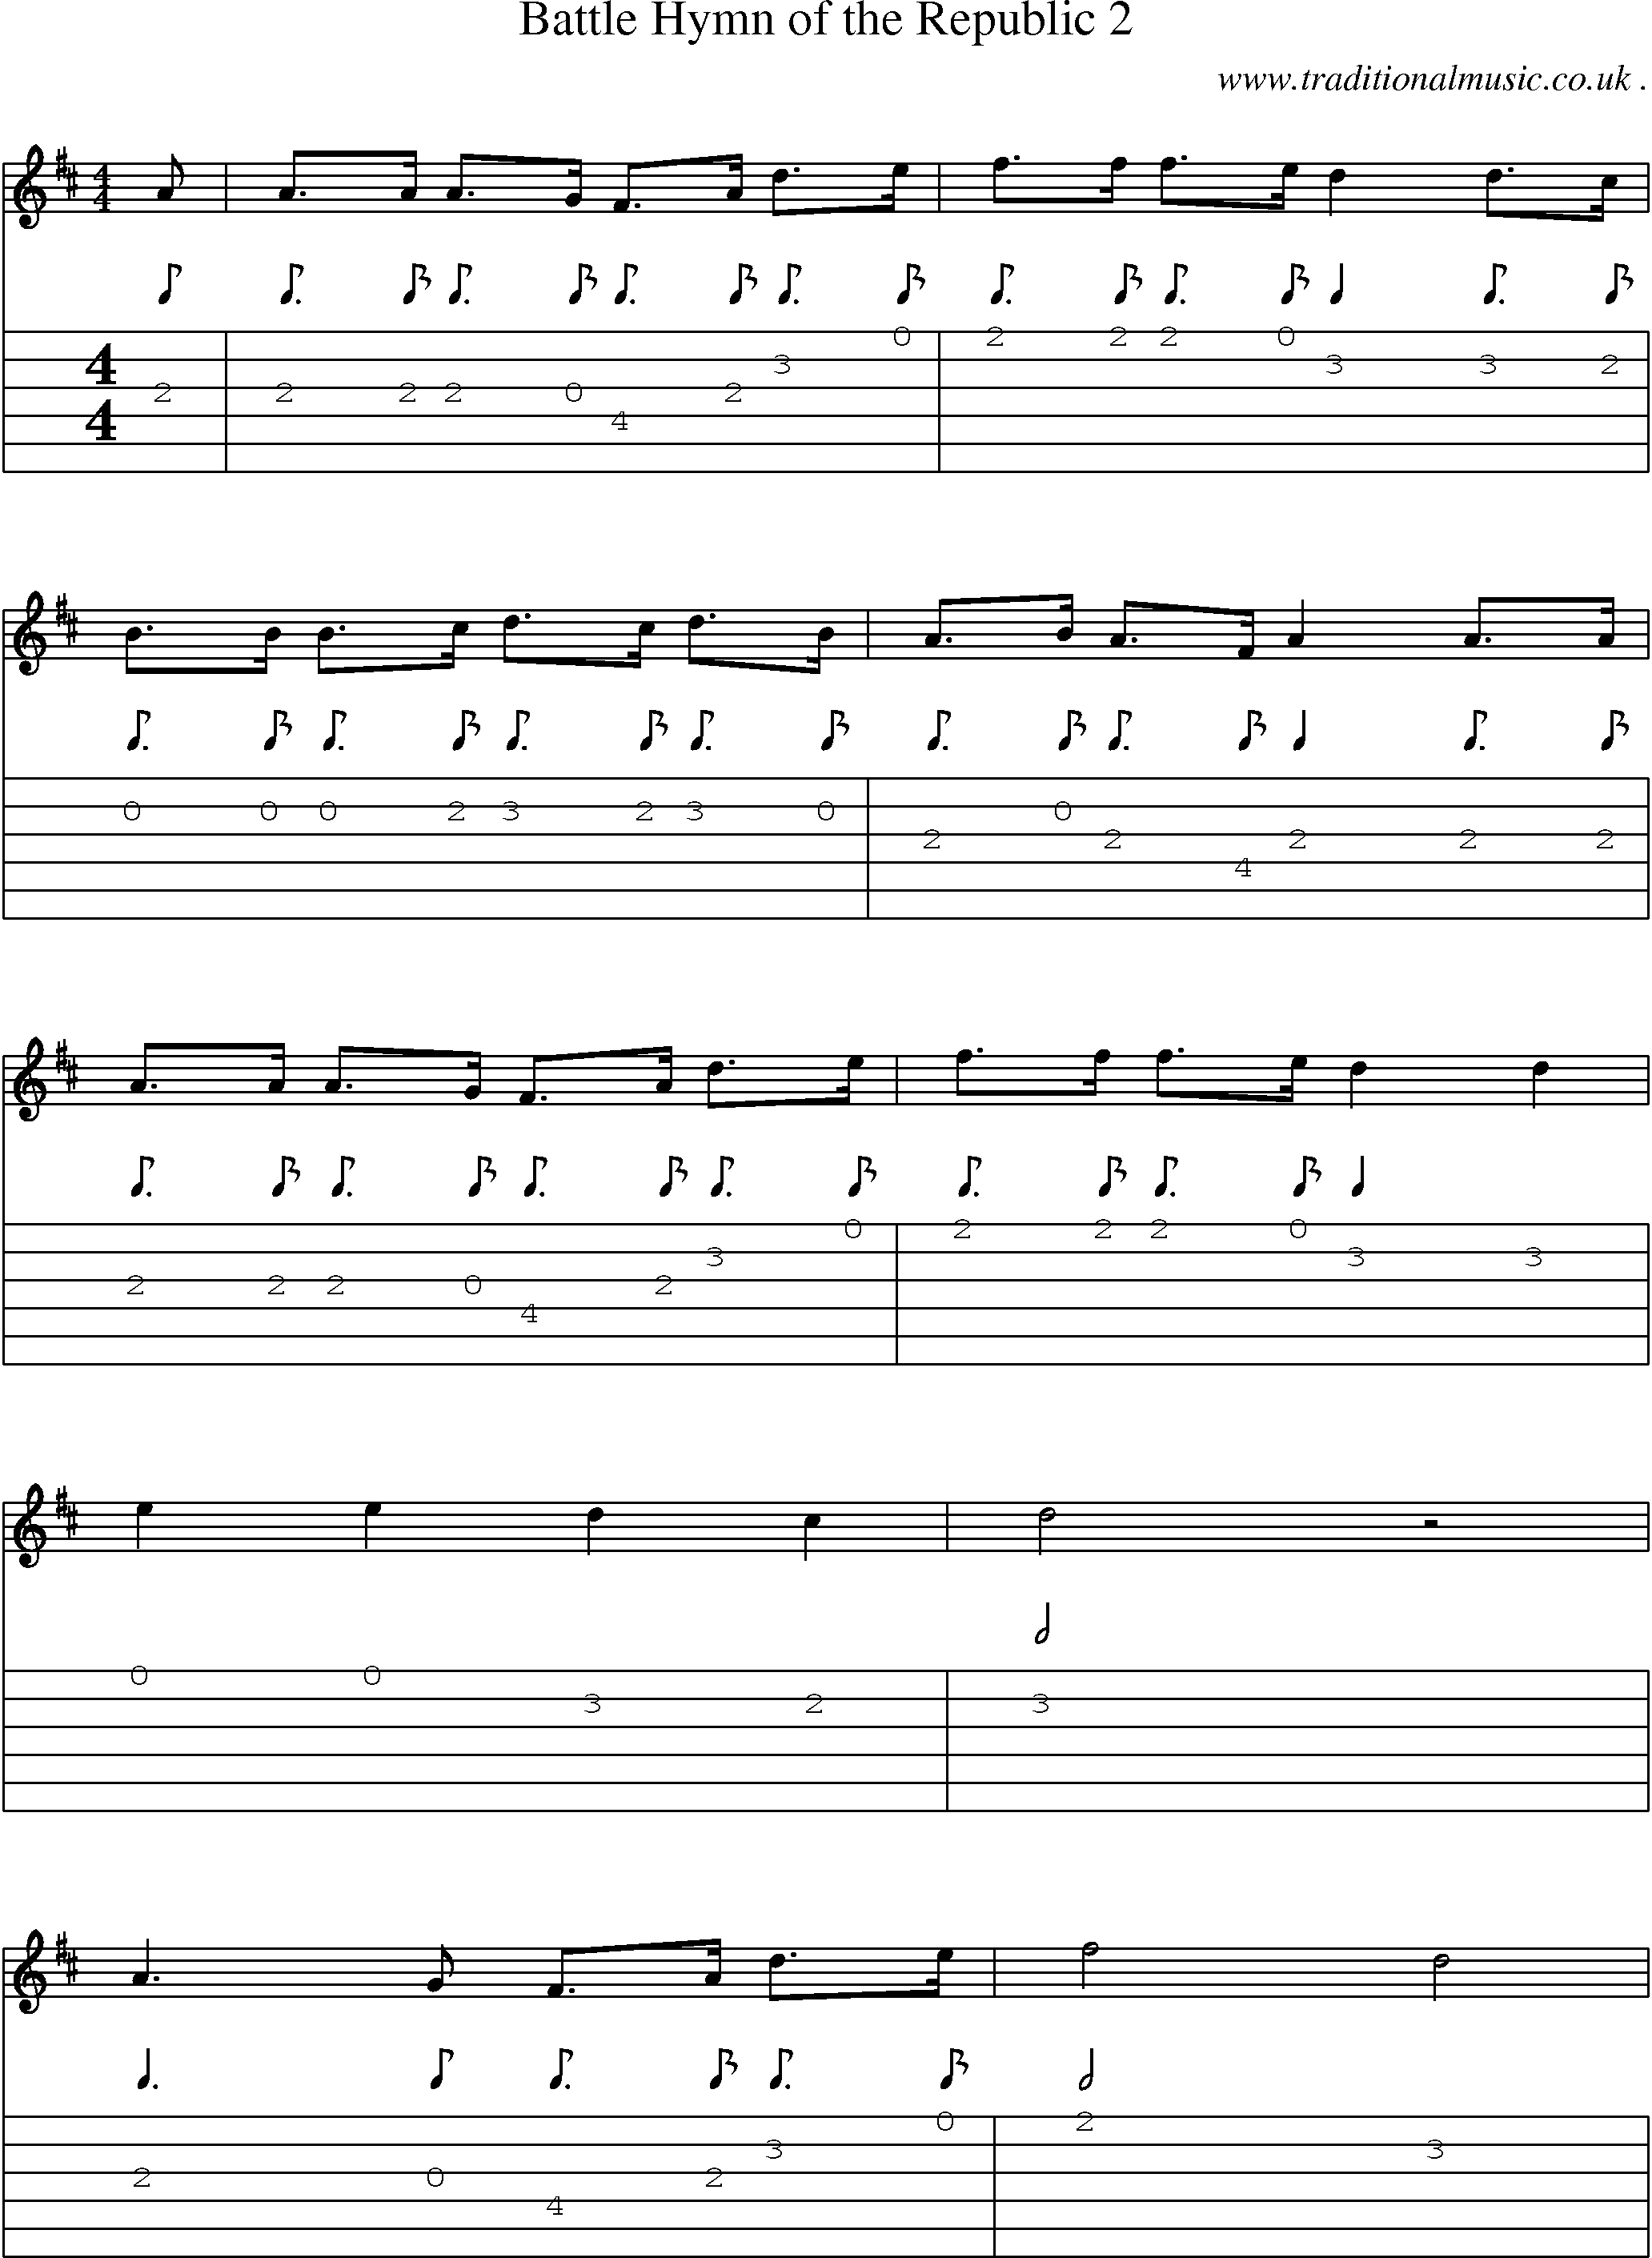 Music Score and Guitar Tabs for Battle Hymn Of The Republic 2